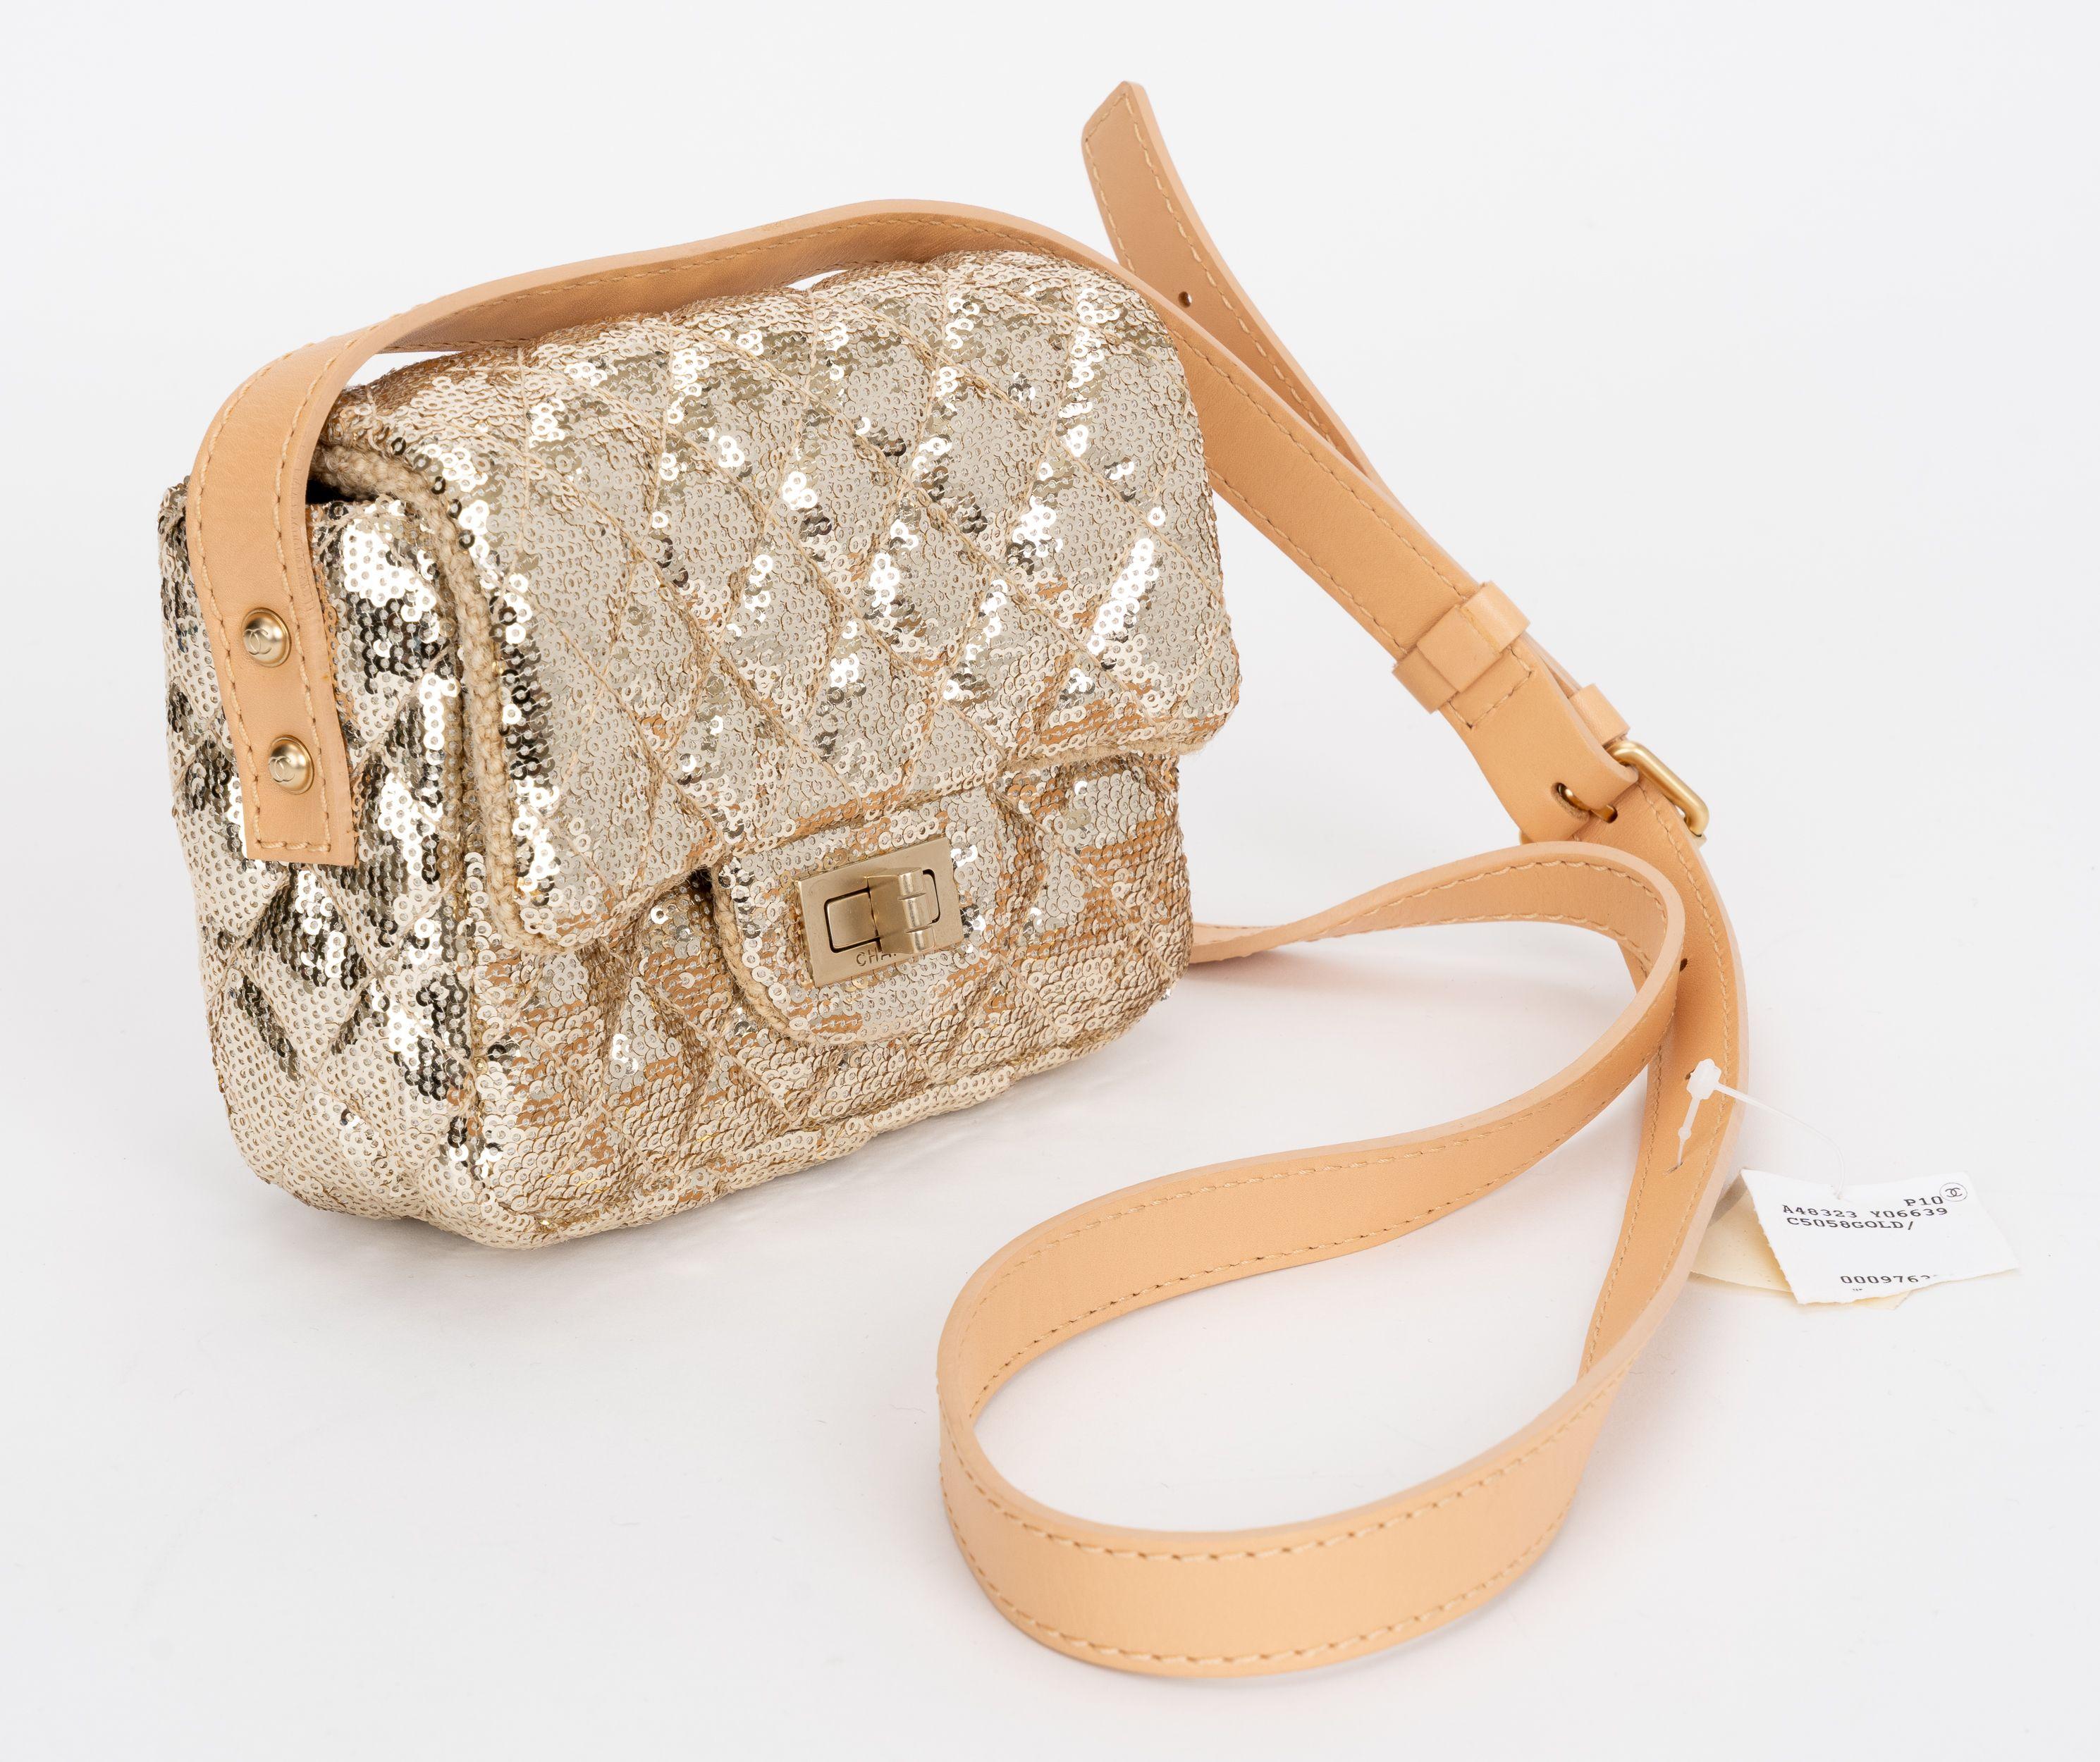 Chanel Mini Easy Sequin Reissue Flap Bag from the Spring 2010 Collection by Karl Lagerfeld. Sequins with antiqued gold tone hardware. Single adjustable shoulder strap. Features a twill interior lining and a single interior pocket. Turn lock